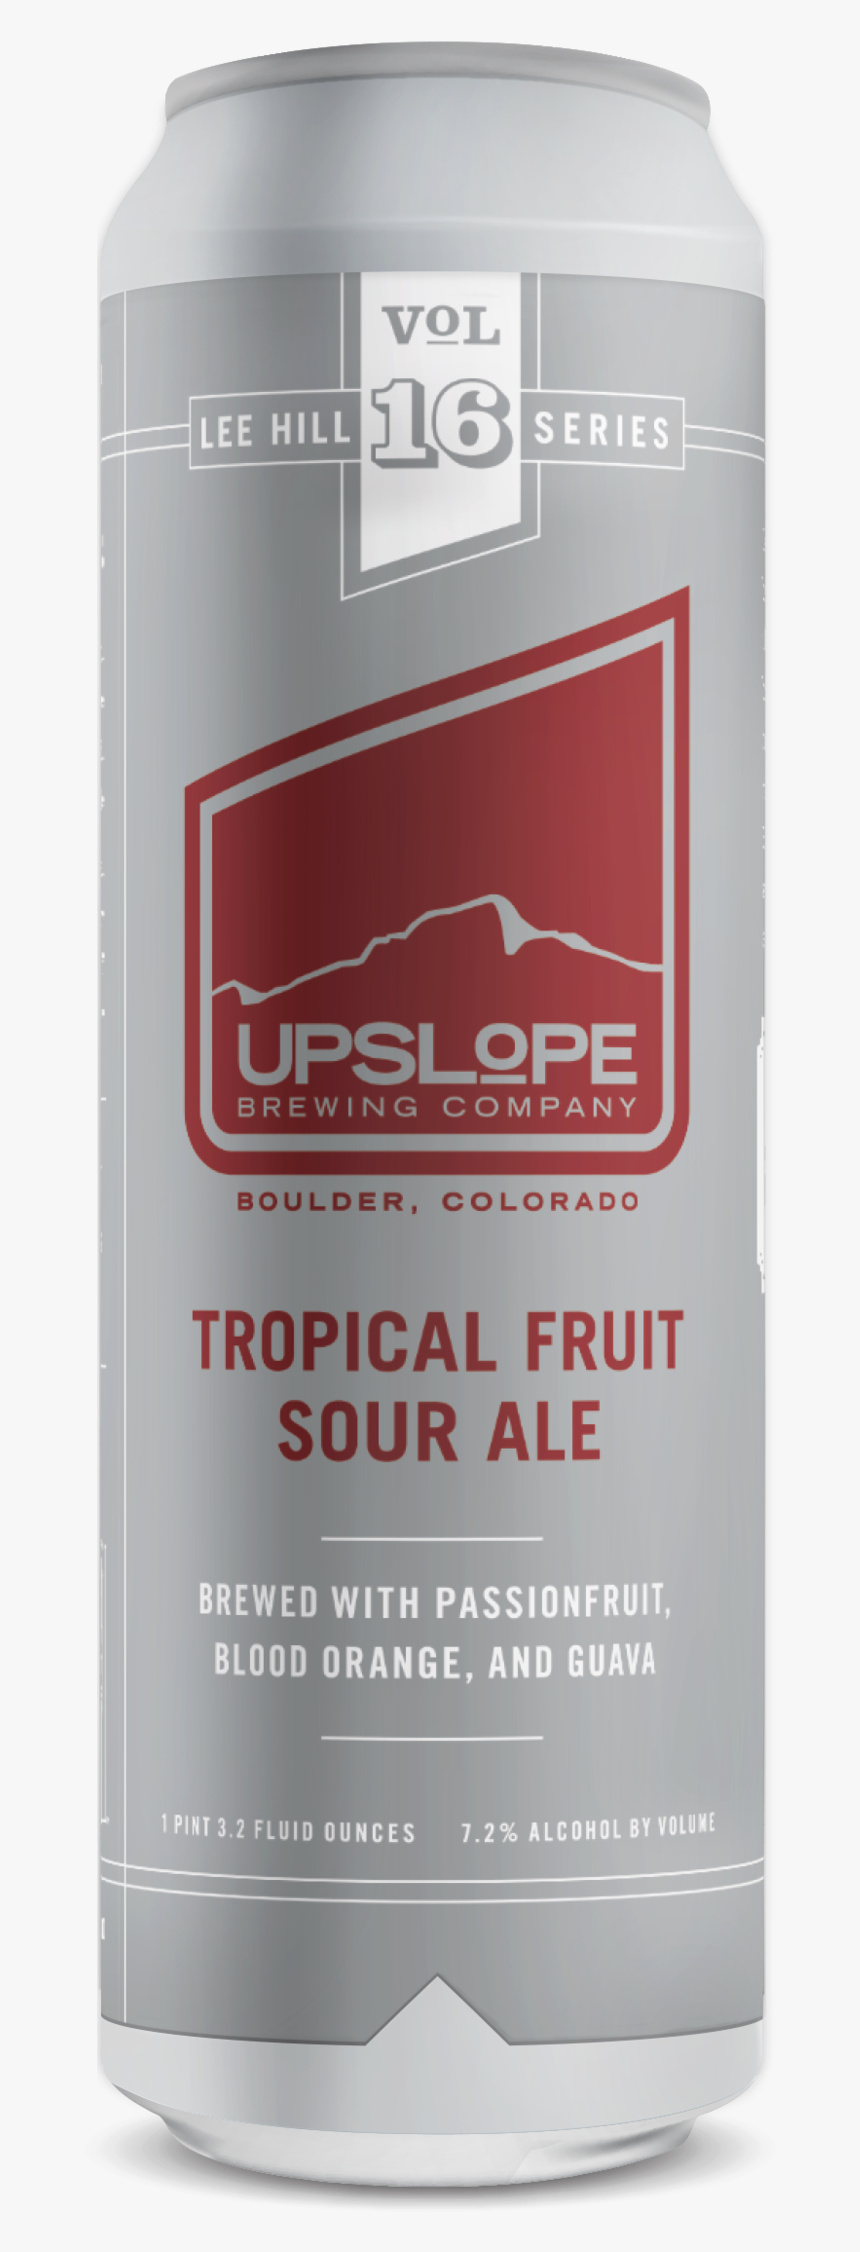 Upslope Brewing Co - Upslope Brewing Company, HD Png Download, Free Download